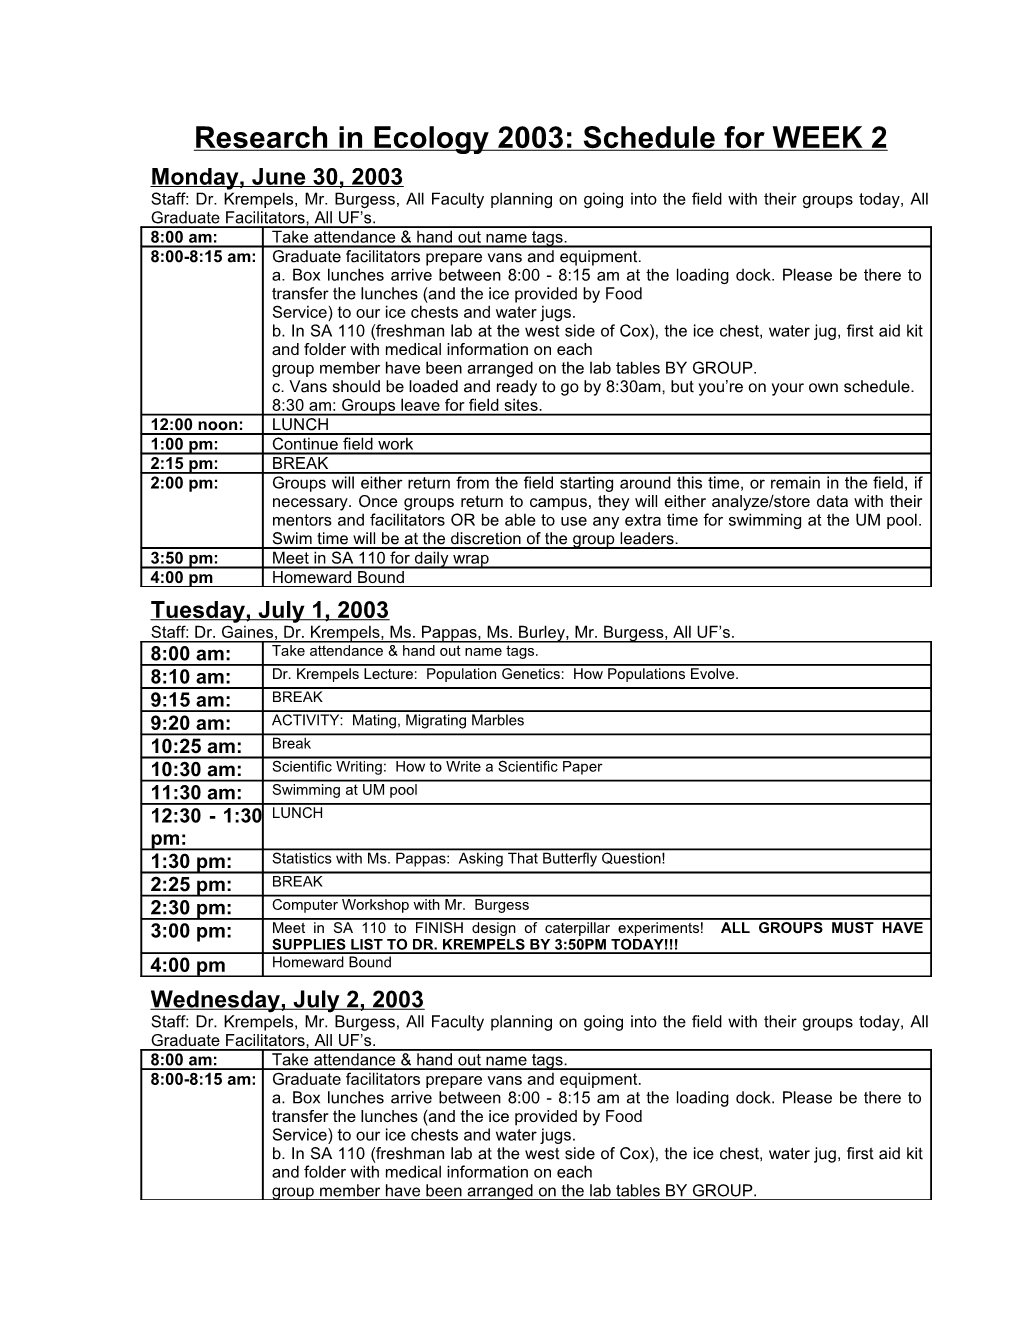 Research in Ecology 2003: Schedule for WEEK 2